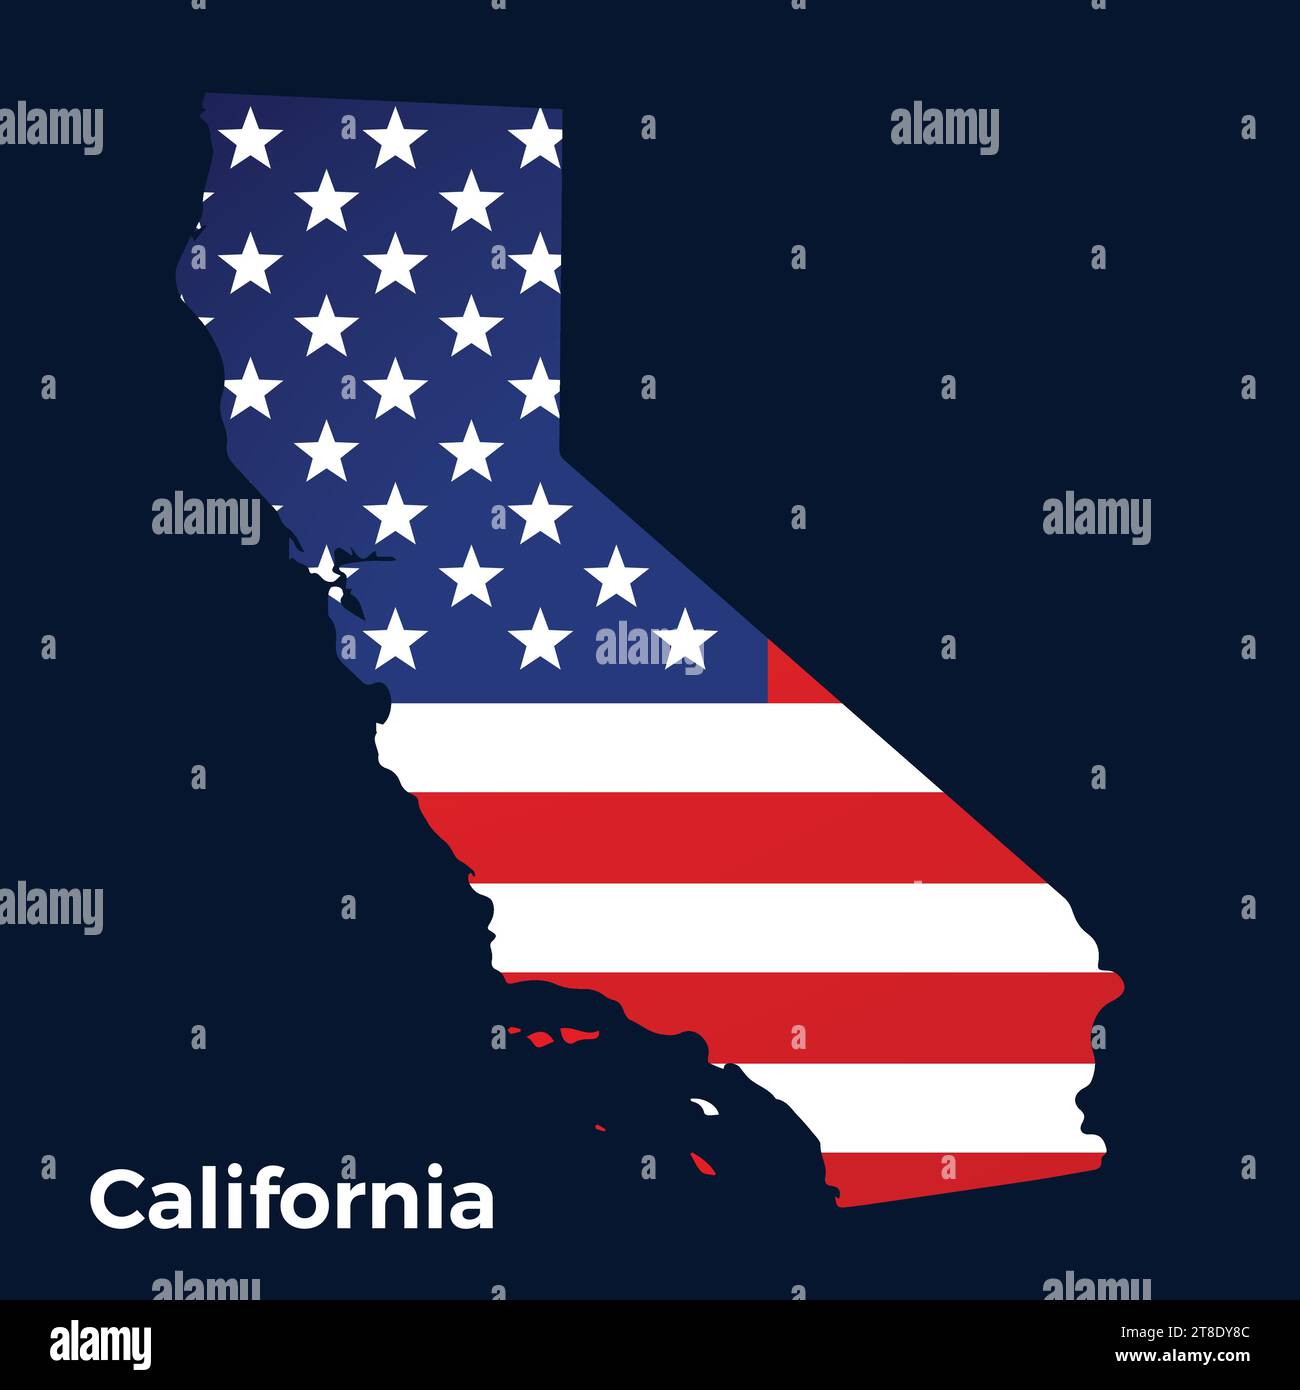 Map of the State of California and American flag illustration Stock Vector